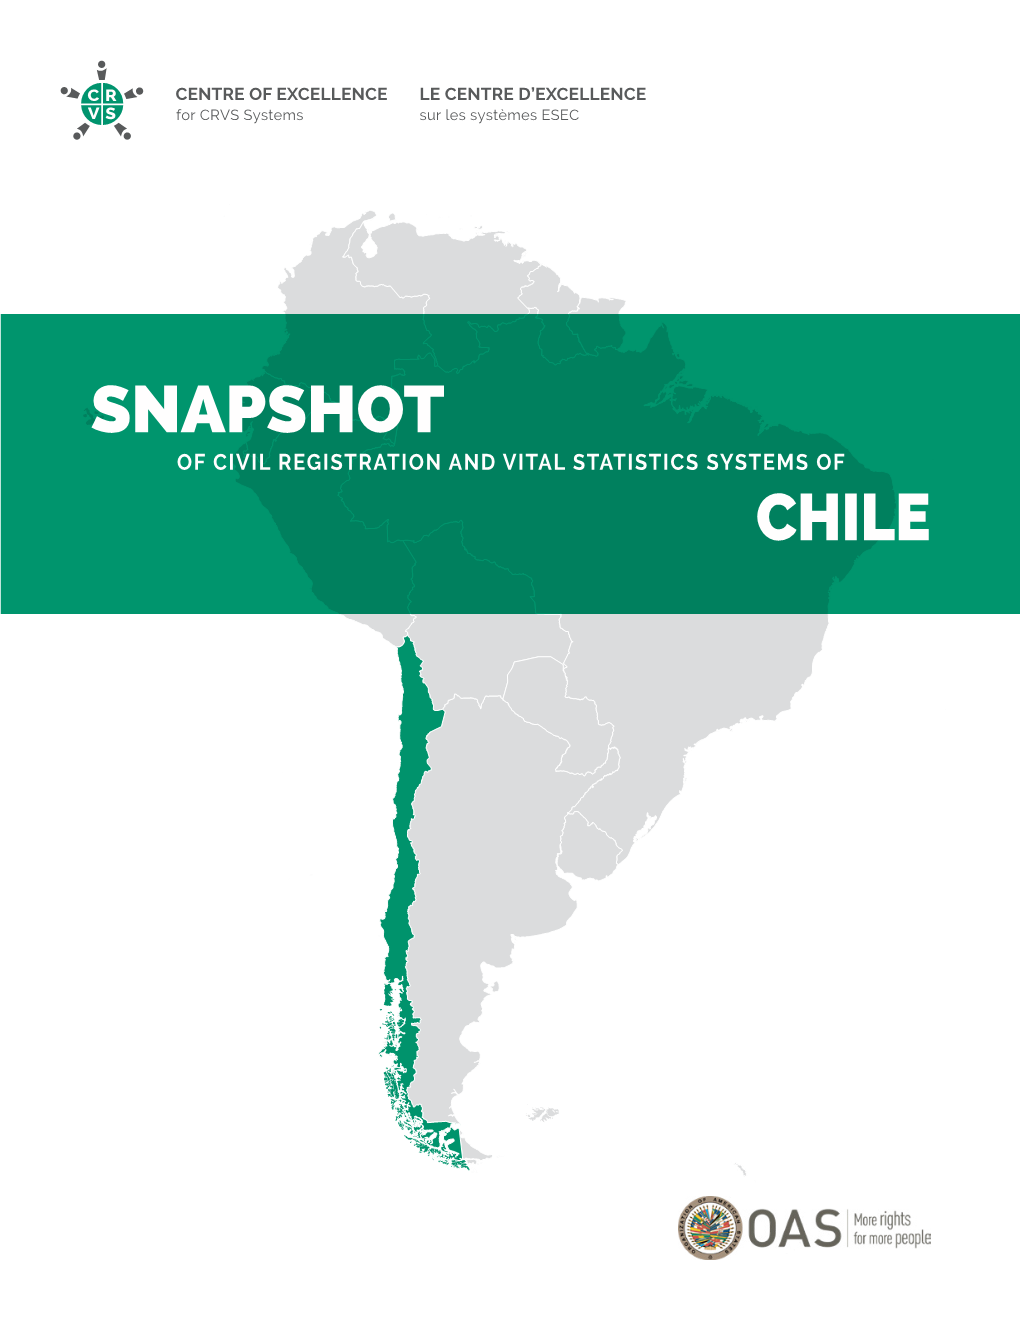 SNAPSHOT of CIVIL REGISTRATION and VITAL STATISTICS SYSTEMS of CHILE Ii SNAPSHOT of CRVS SYSTEMS of CHILE